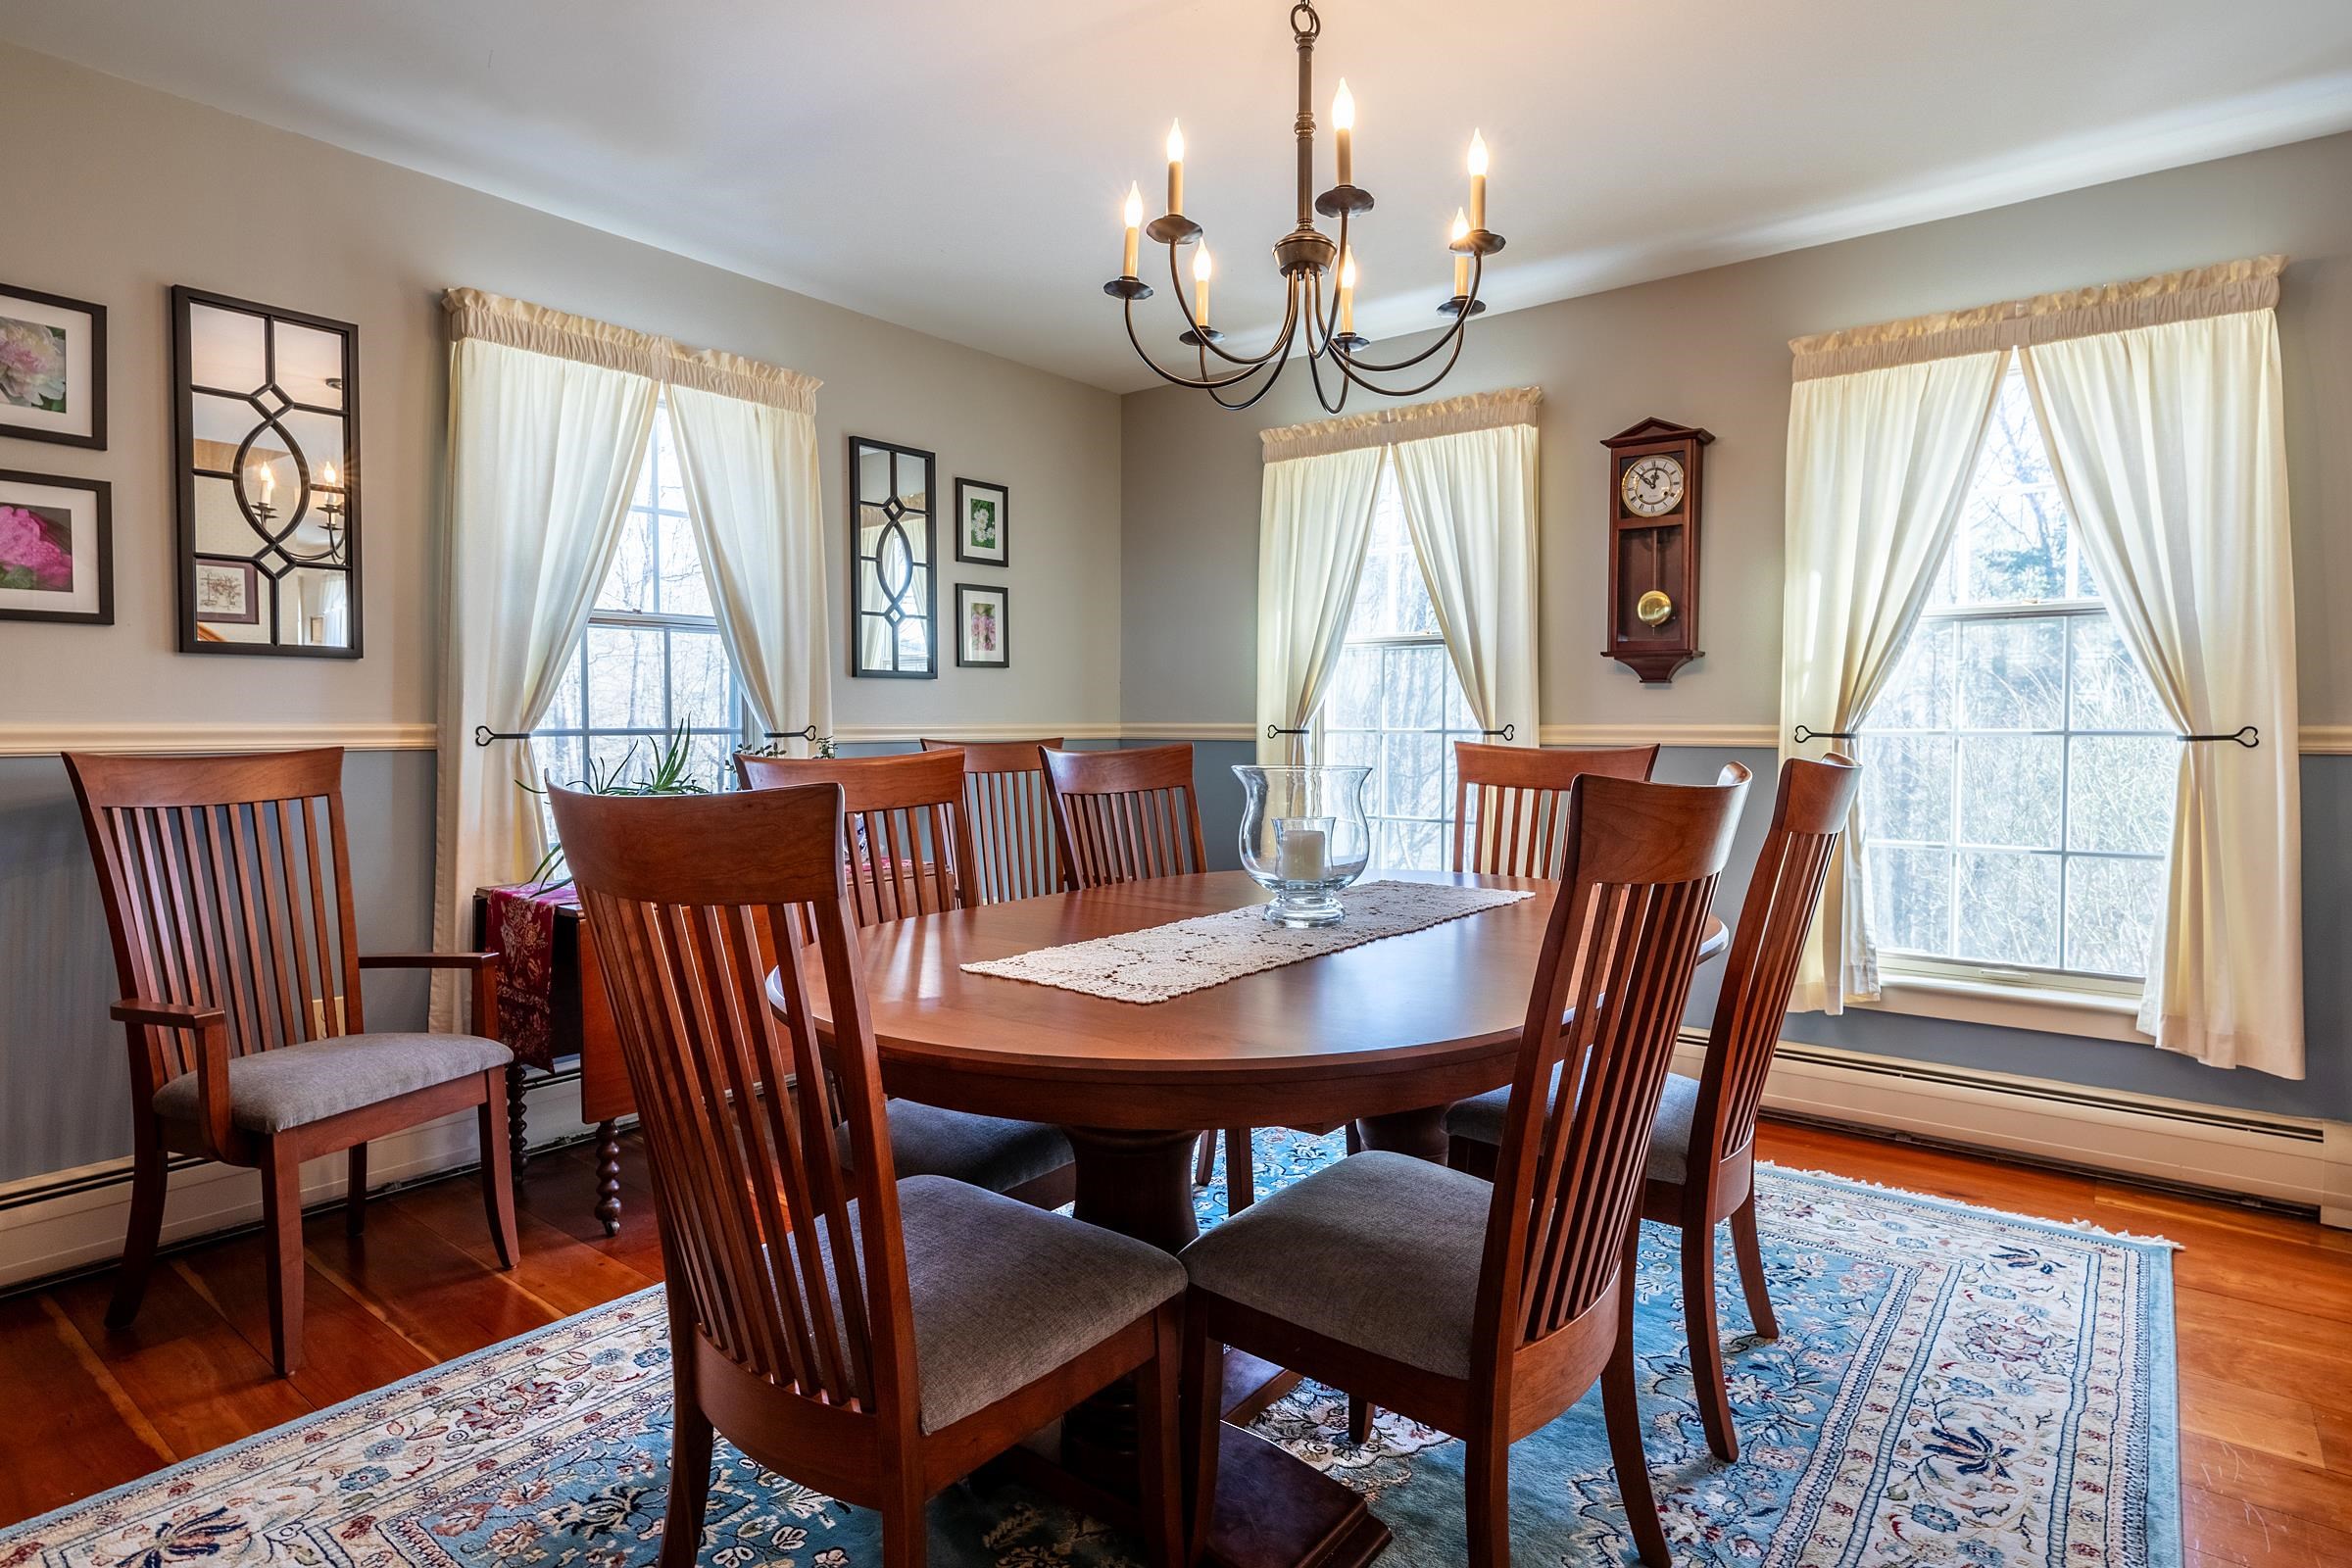 Spacious dining room with cherry wood floors